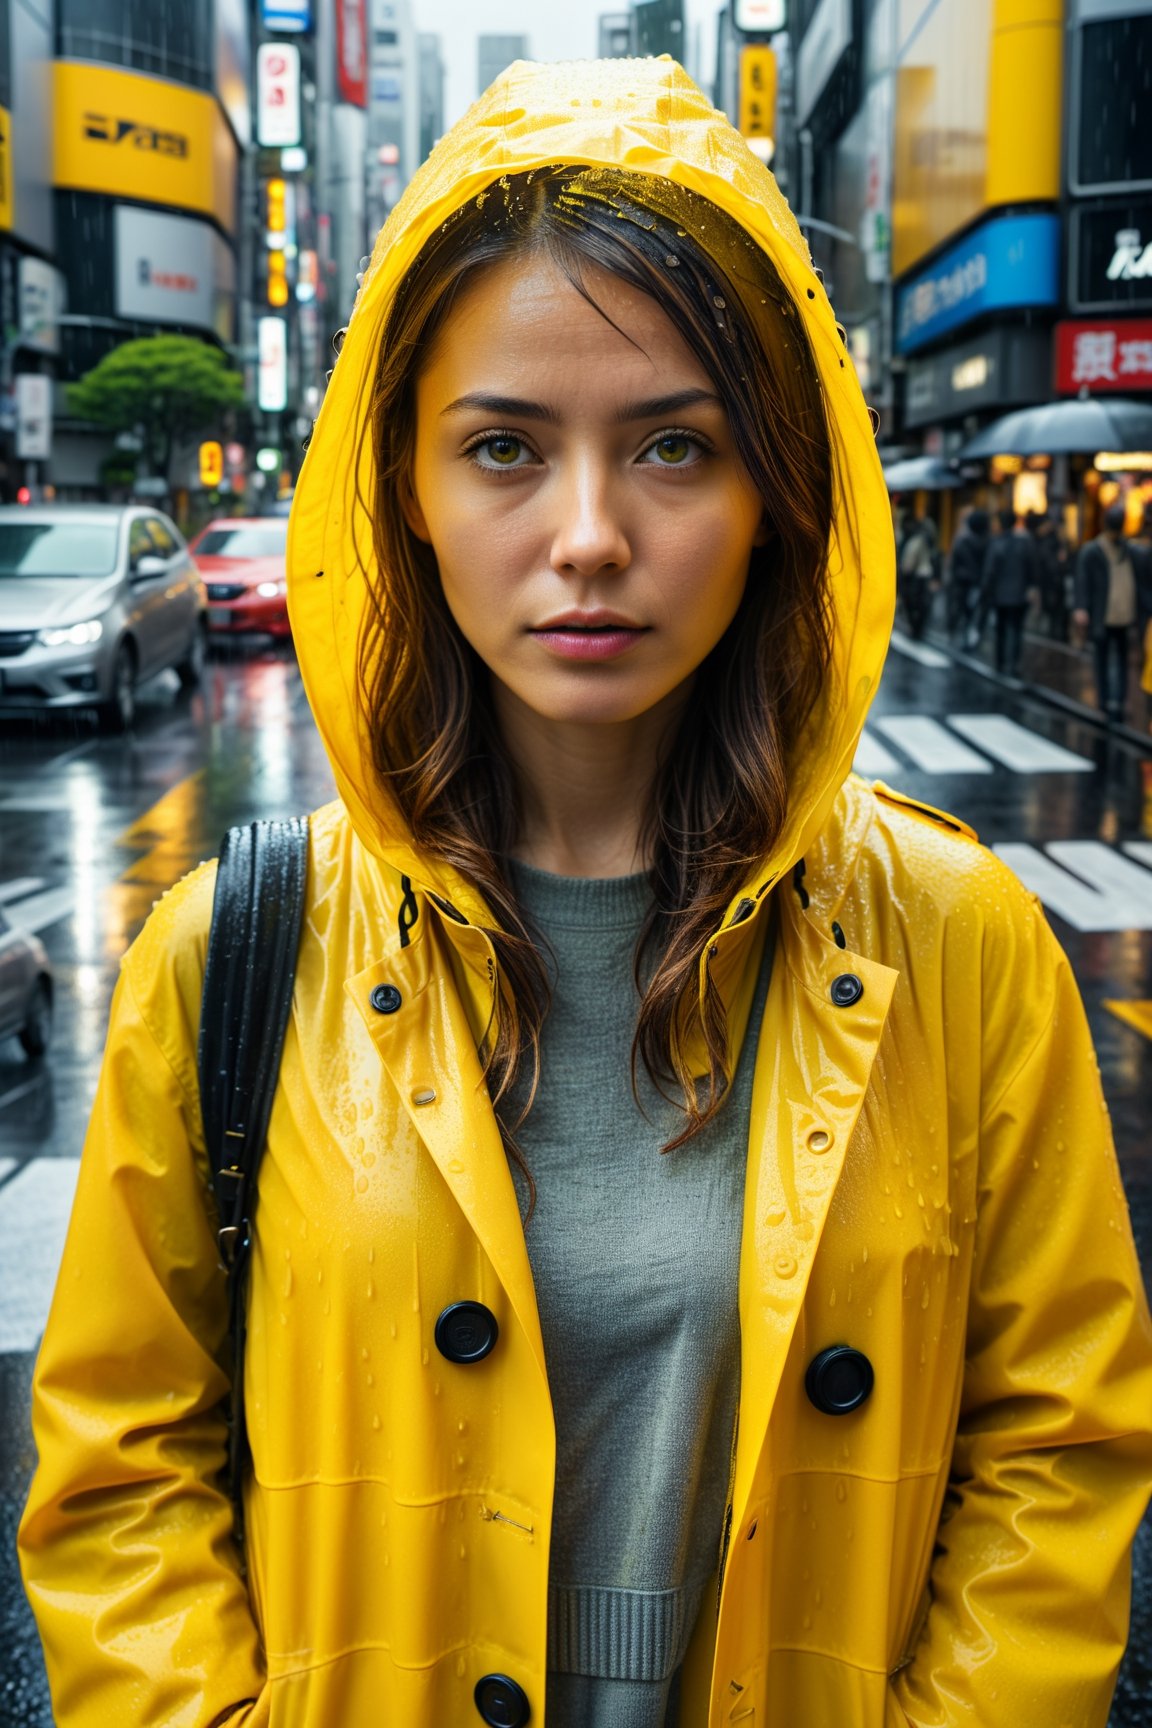 8k HDR photo portrait of a woman in a yellow raincoat, at a bustling crosswalk in shibuya, Highly Detailed, Vibrant, Production Cinematic Render, reflections on wet street, 8k render